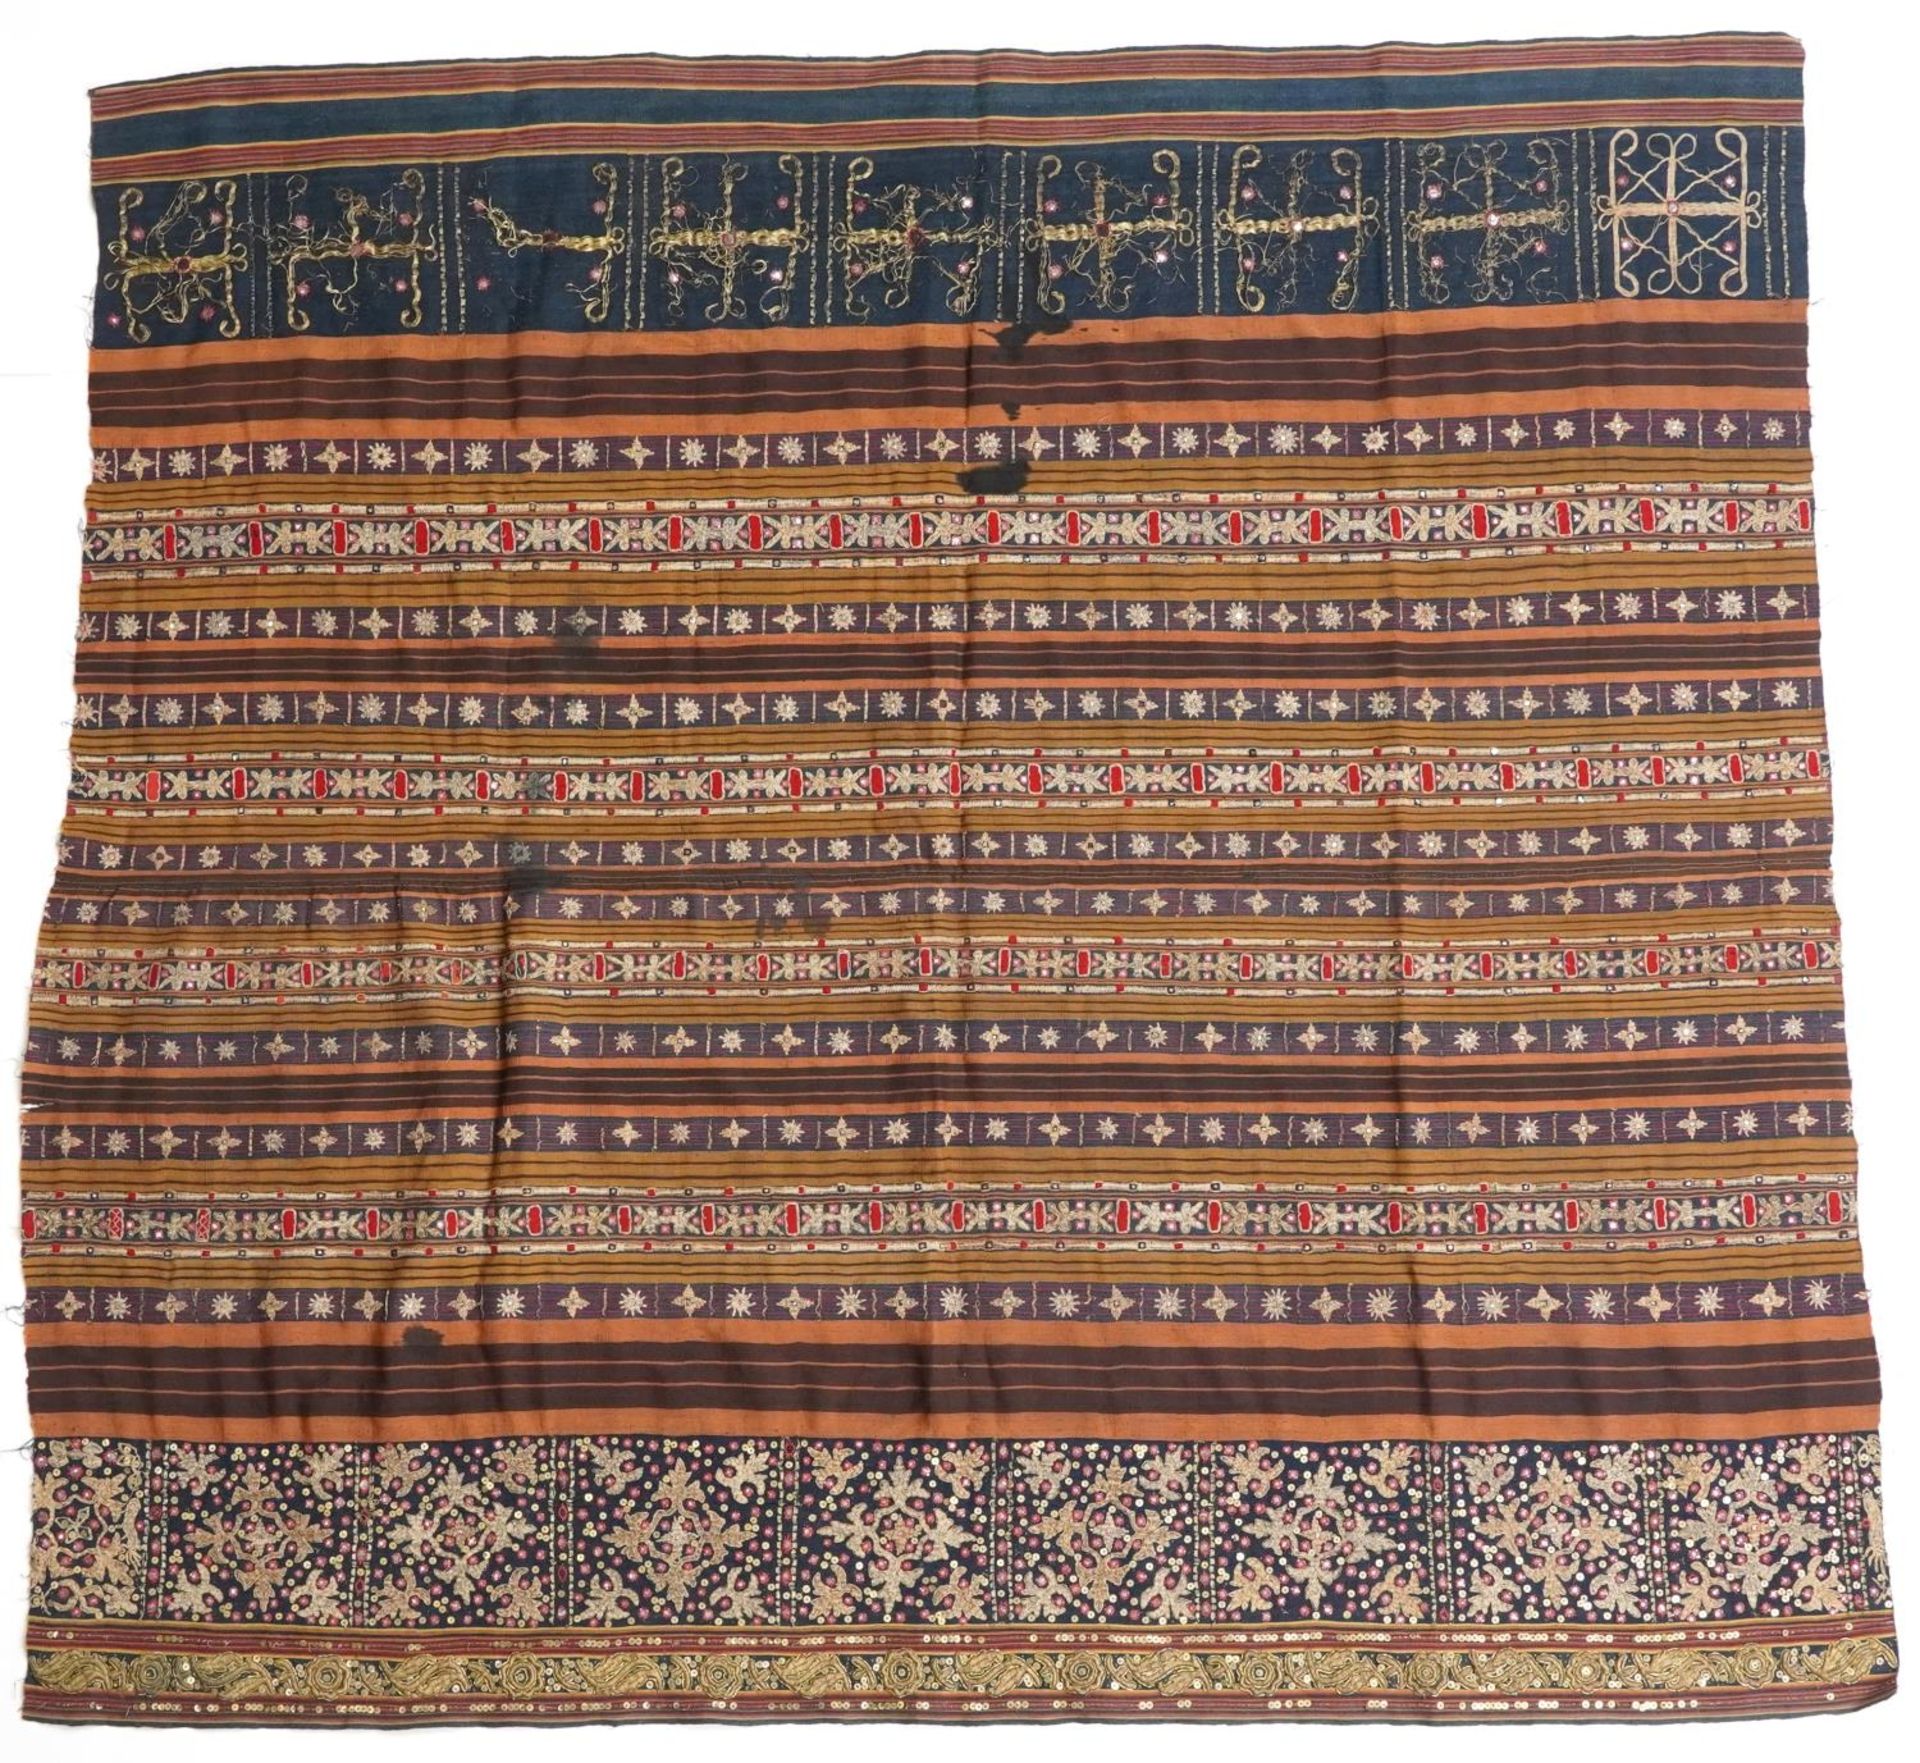 Islamic gold braided textile embroidered with flowers and a robe, the robe 115cm high - Image 5 of 7